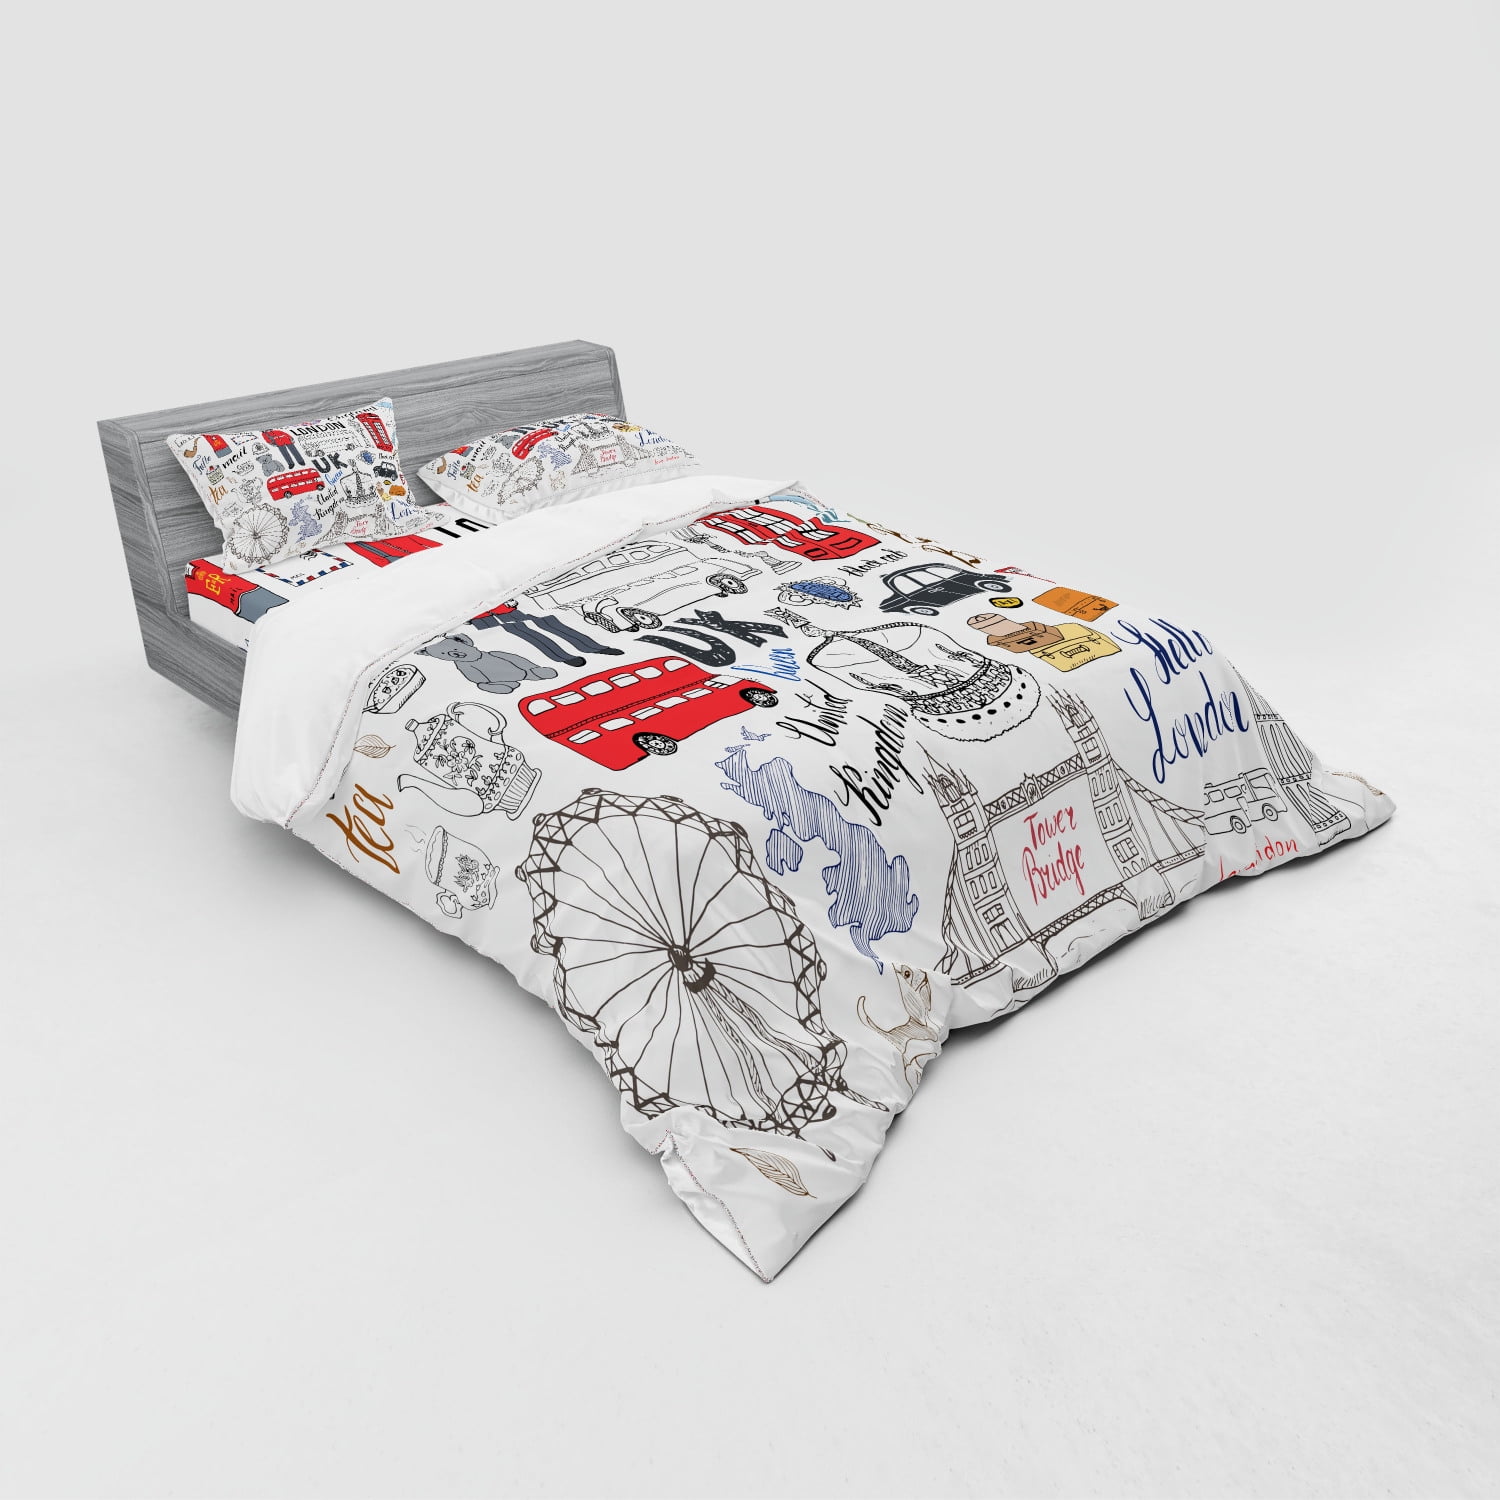 Multicolor nev_41655_twin Ambesonne Doodle Duvet Cover Set Twin Size I Love London Double Decker Bus Telephone Booth Cab Crown of United Kingdom Big Ben Decorative 2 Piece Bedding Set with 1 Pillow Sham 